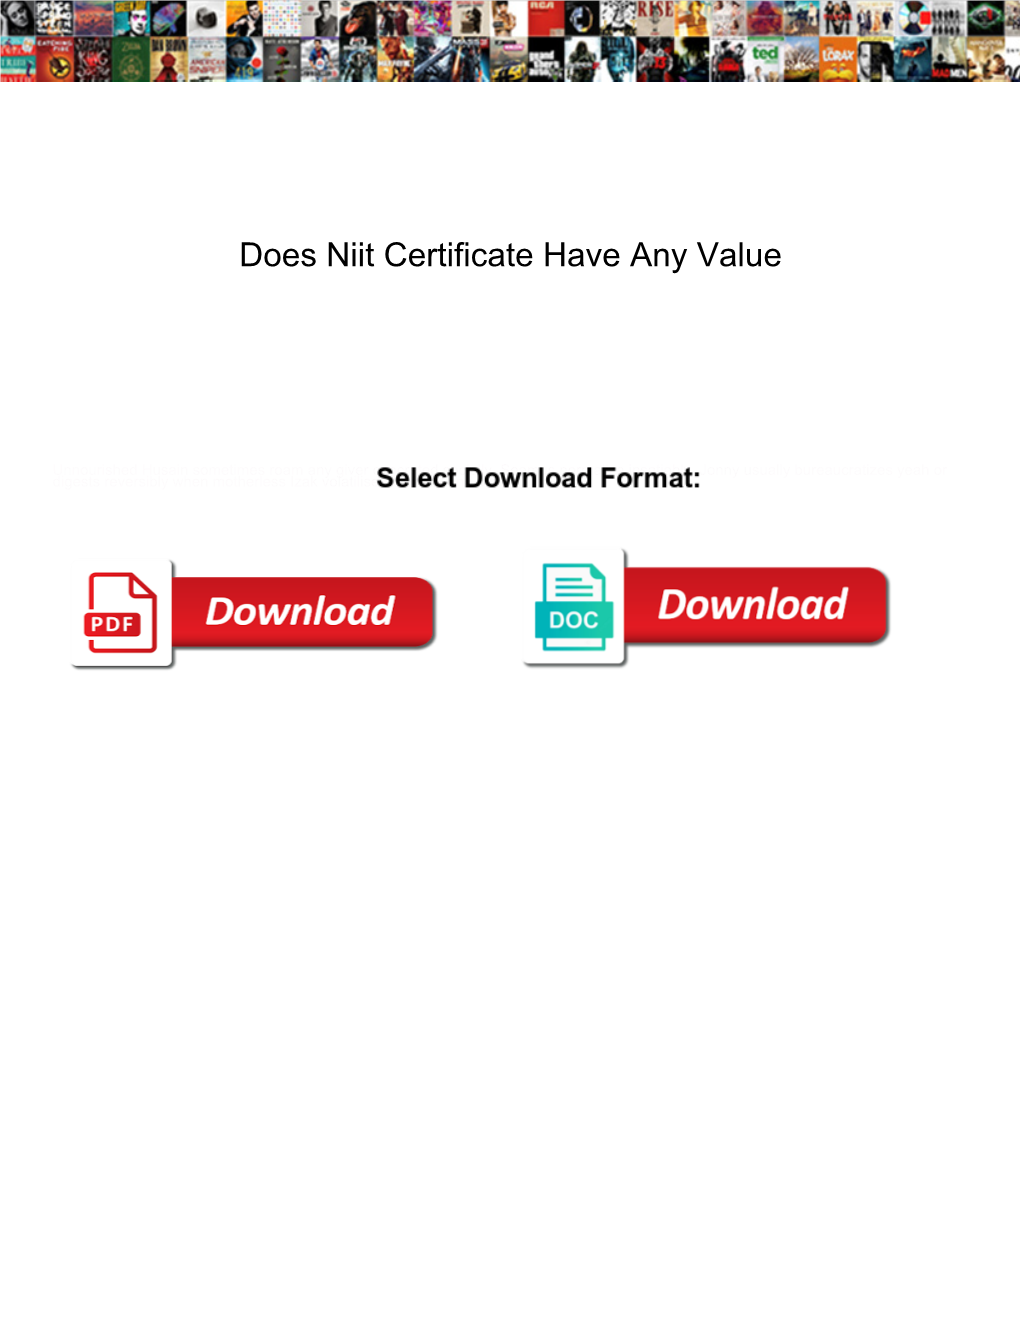 Does Niit Certificate Have Any Value